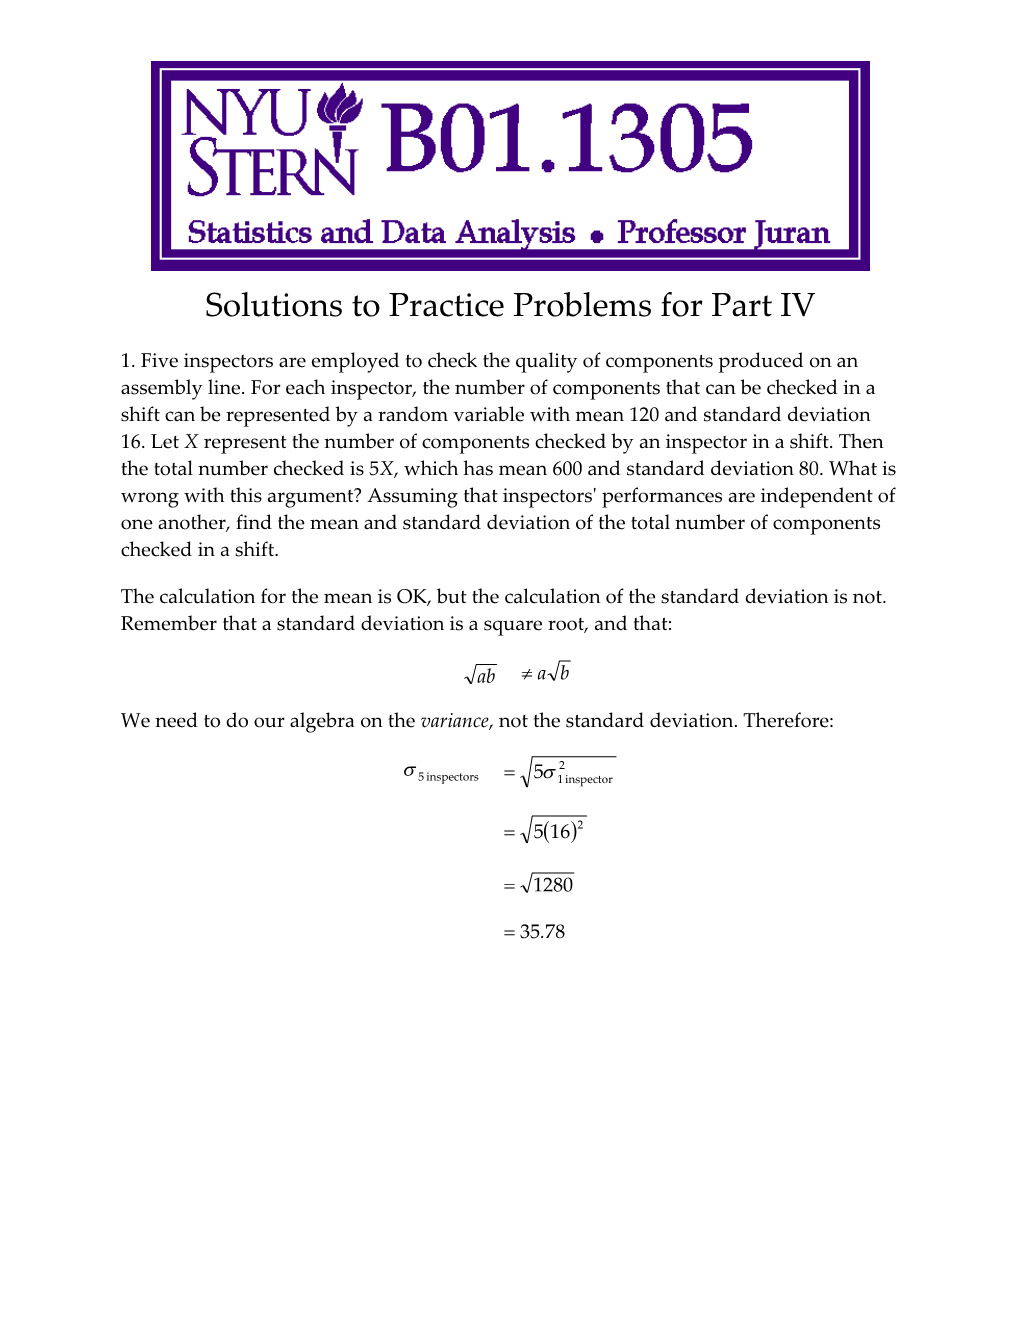 Solutions to Practice Problems for Part IV